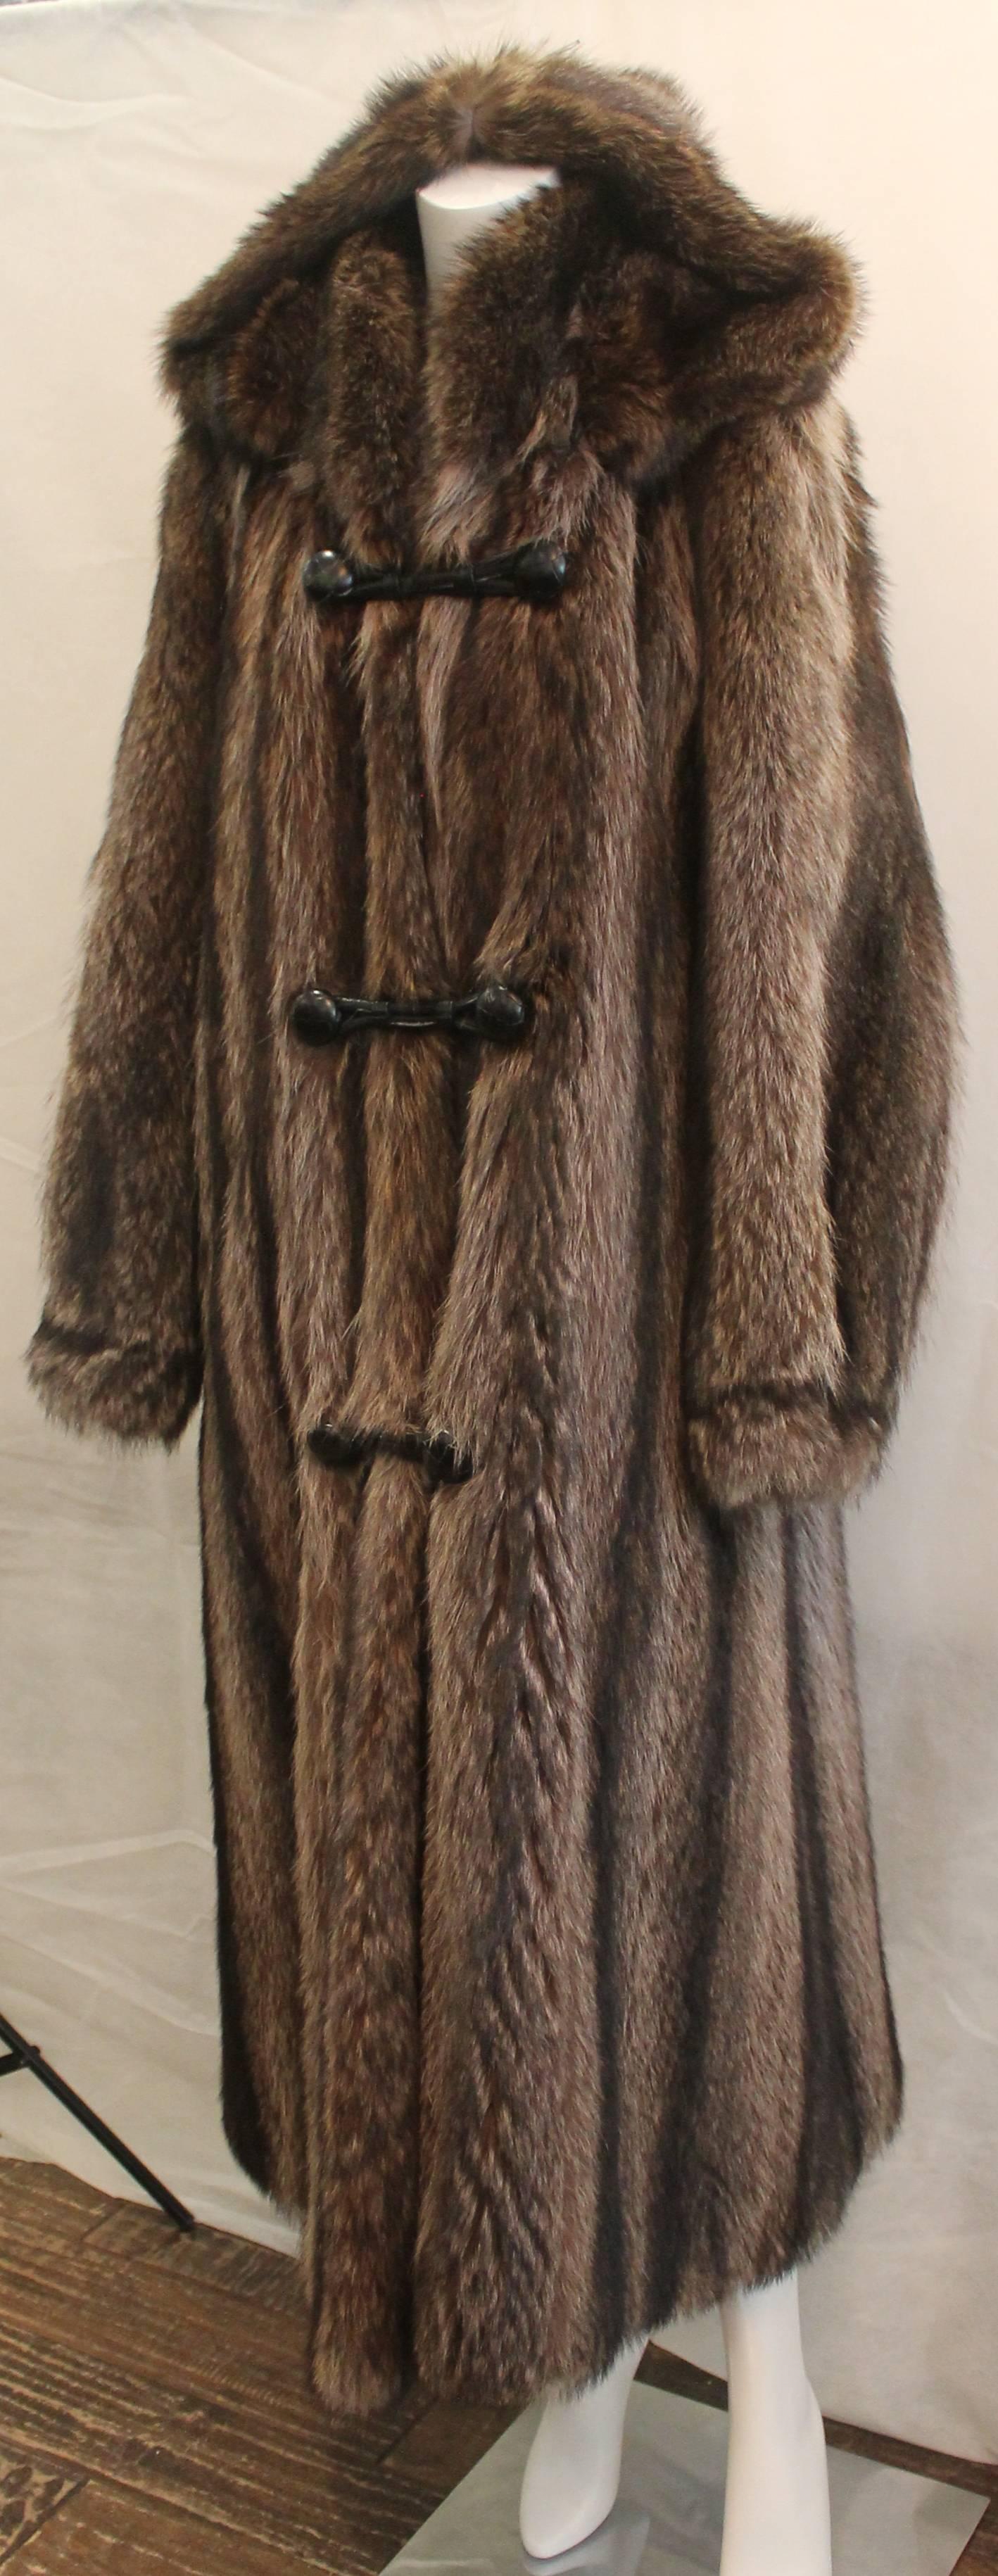 Custom Montgomery Style Hooded Brown Raccoon Full Coat - M. This piece is in excellent condition with the hood being detachable. It has front buttons with closure straps. 

Measurements:
Bust- 44